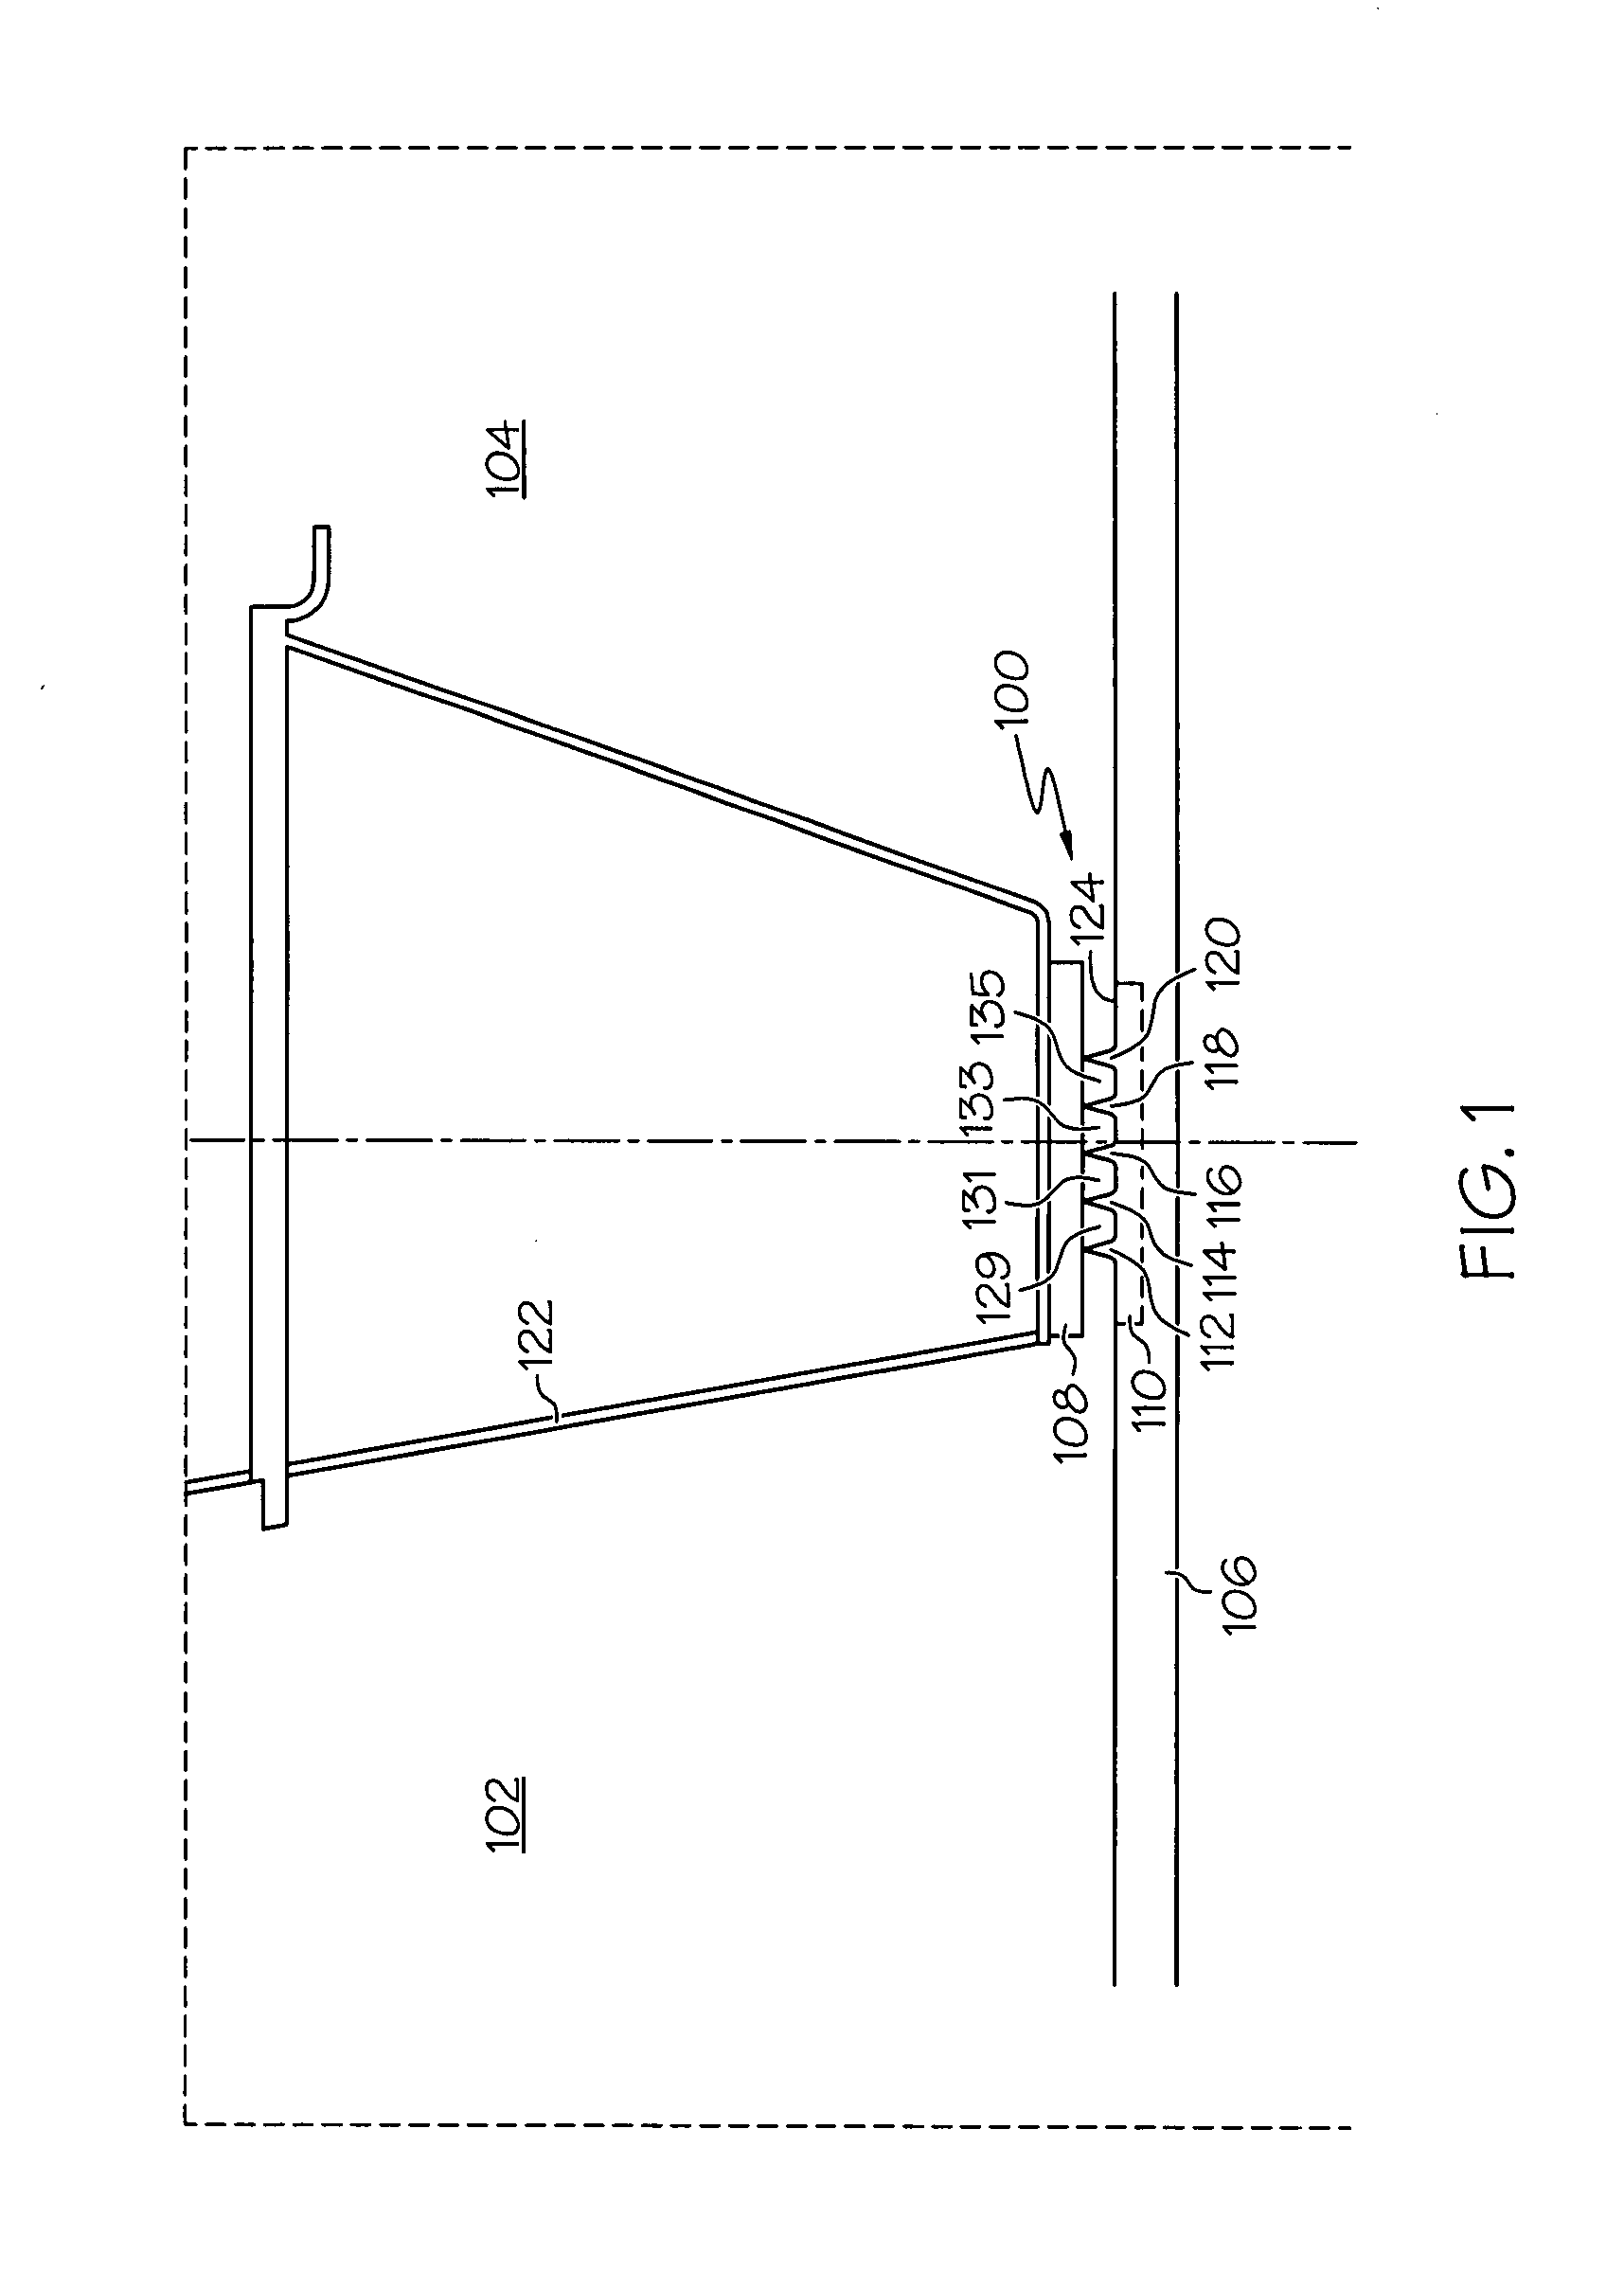 Notched tooth labyrinth seals and methods of manufacture